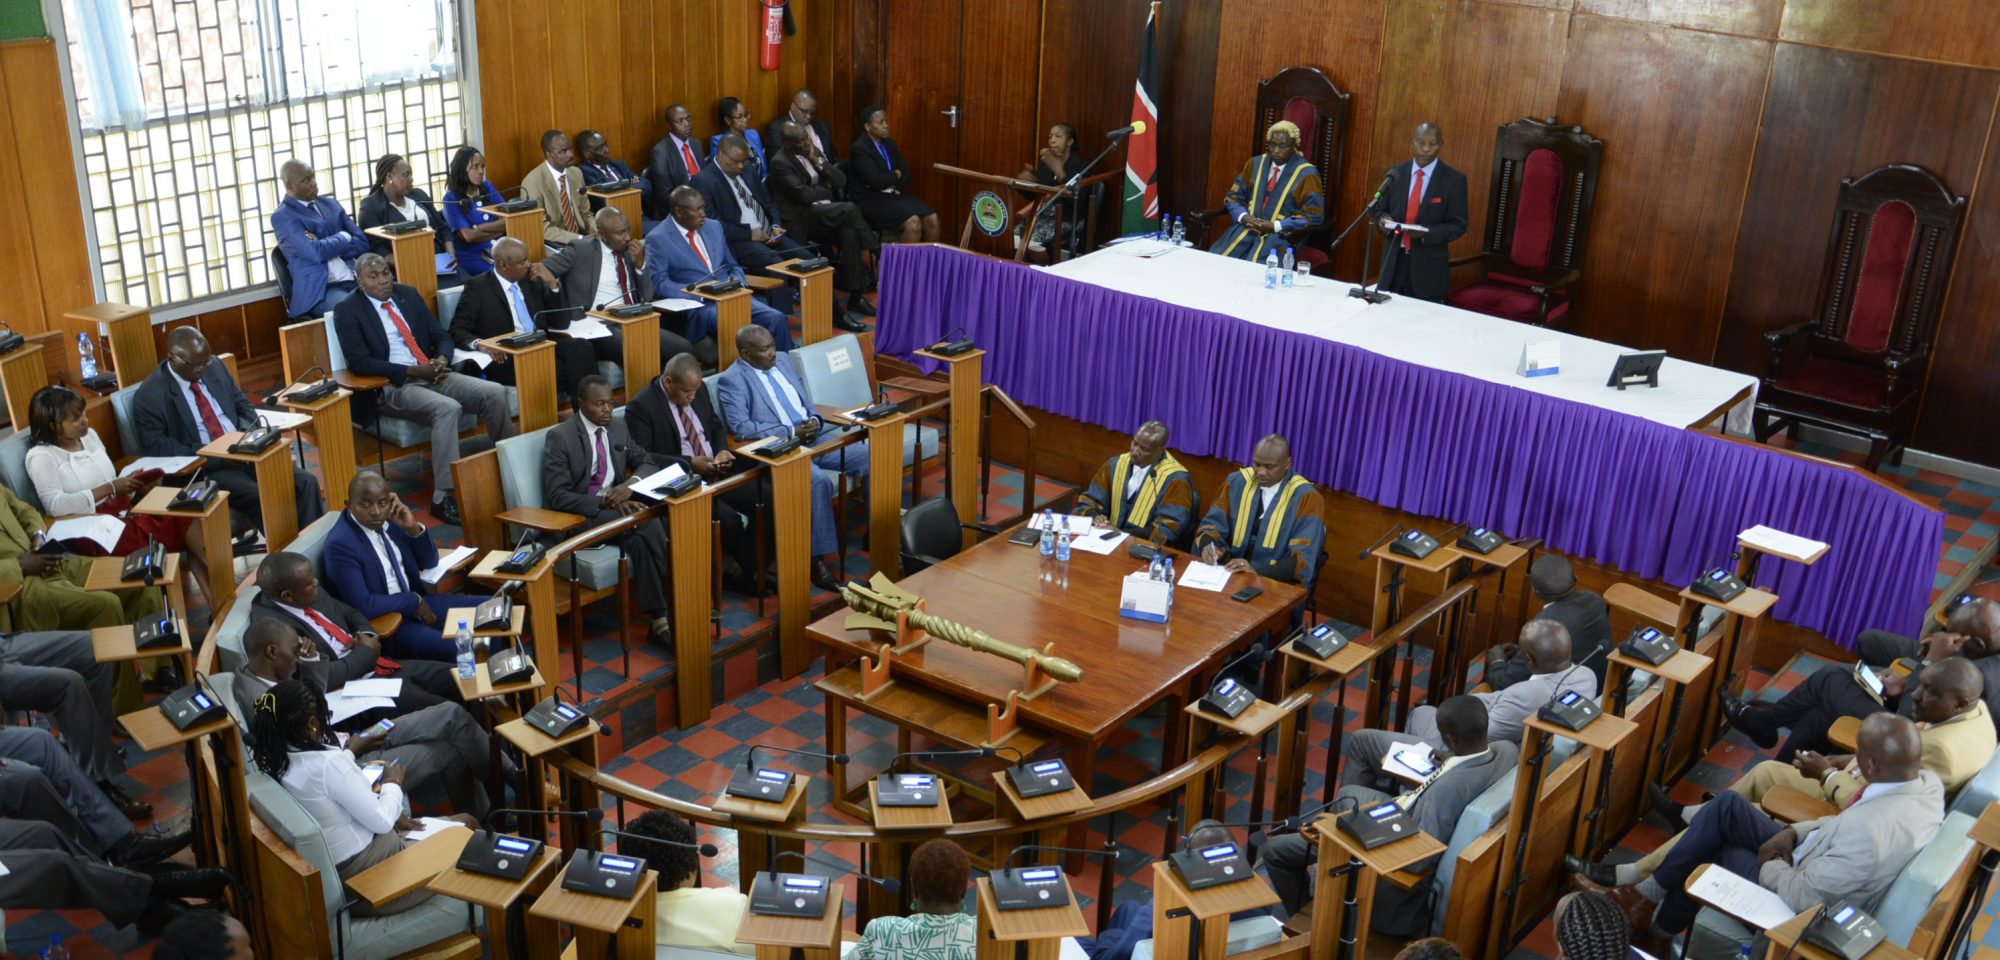 mca salary in kenya - picture of nyeri county assembly in session